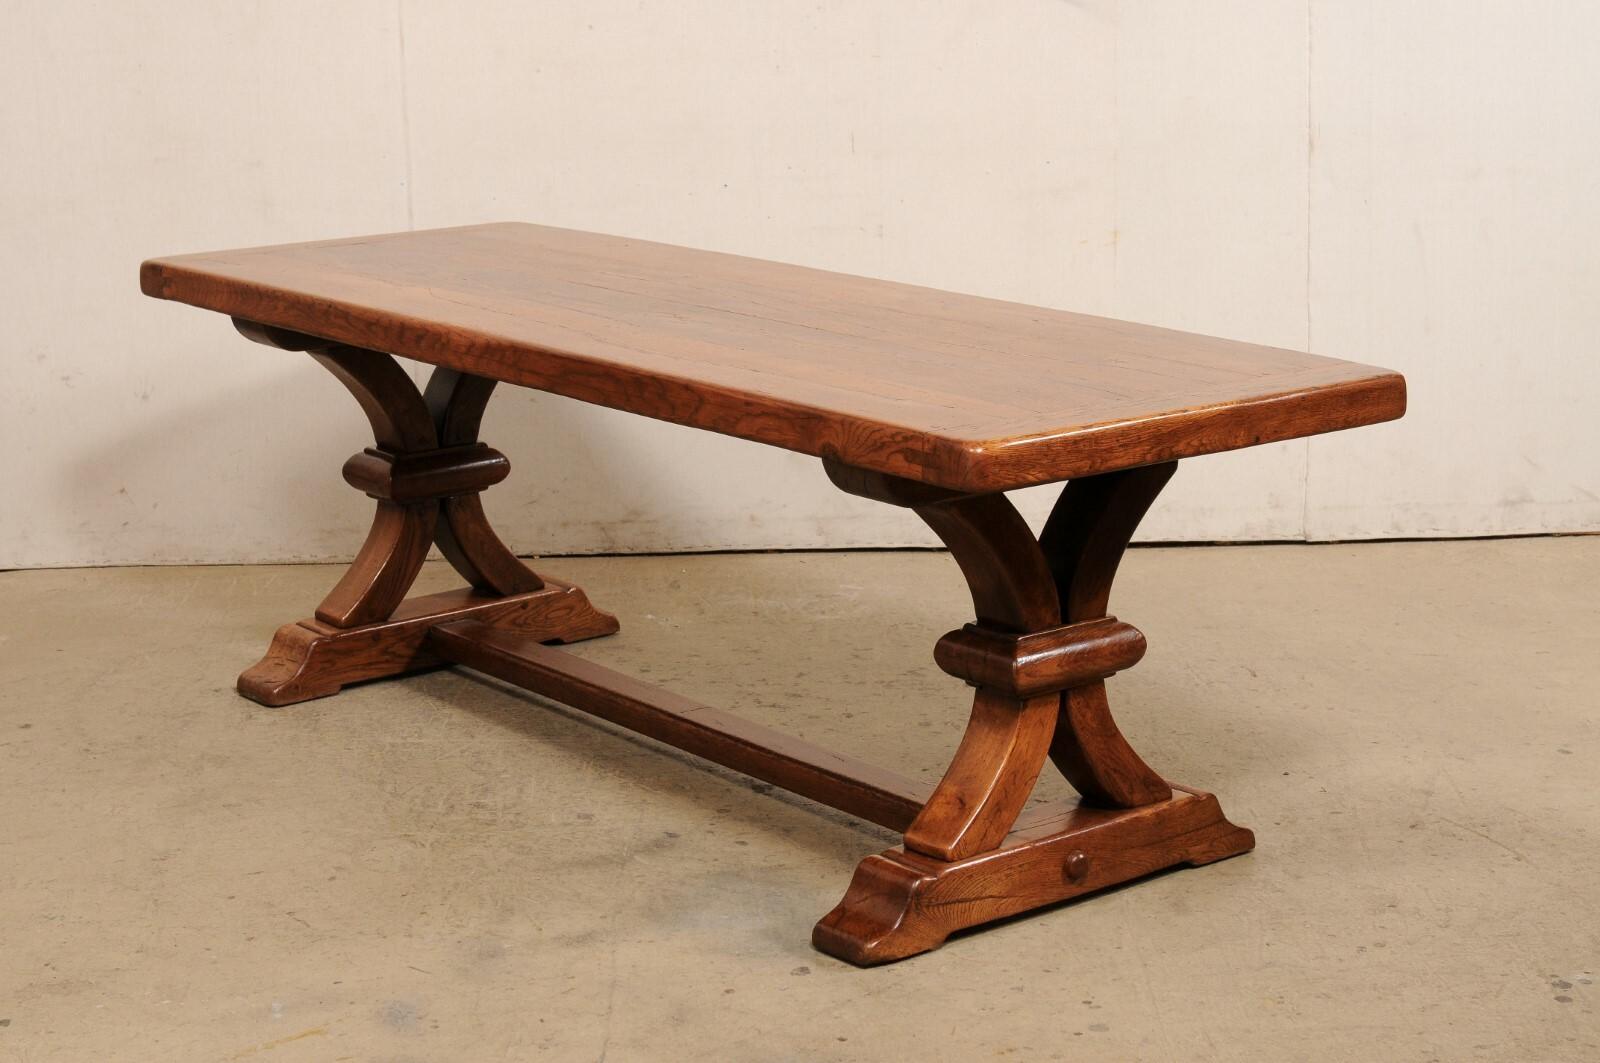 Antique French Wooden Dining Table w/Nicely Carved Trestle Legs, 7+ Ft Long For Sale 3